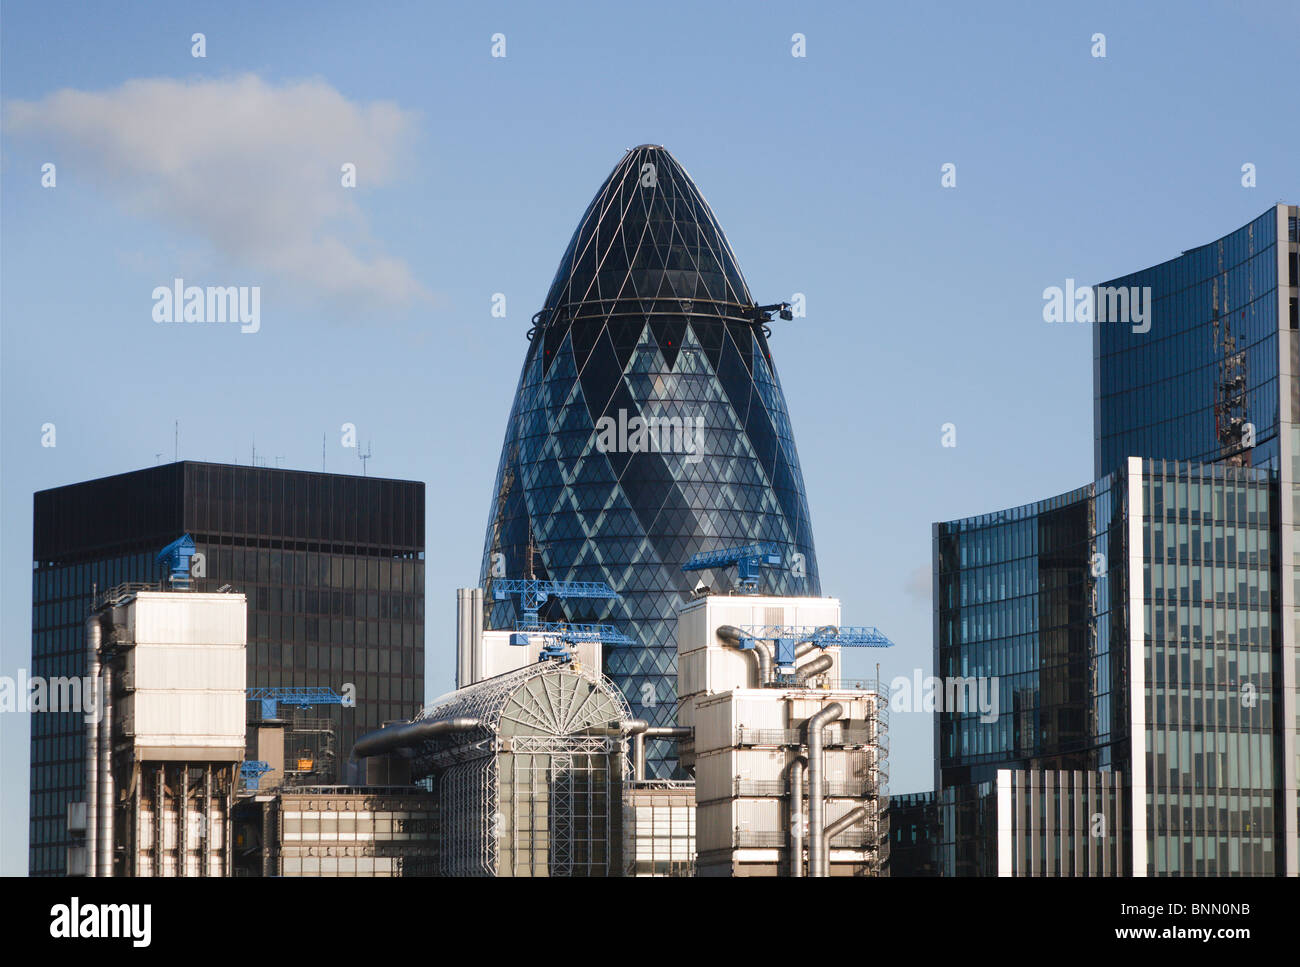 St.Helen's building, 30 St Mary Axe the Willis building and the Lloyds building London Stock Photo